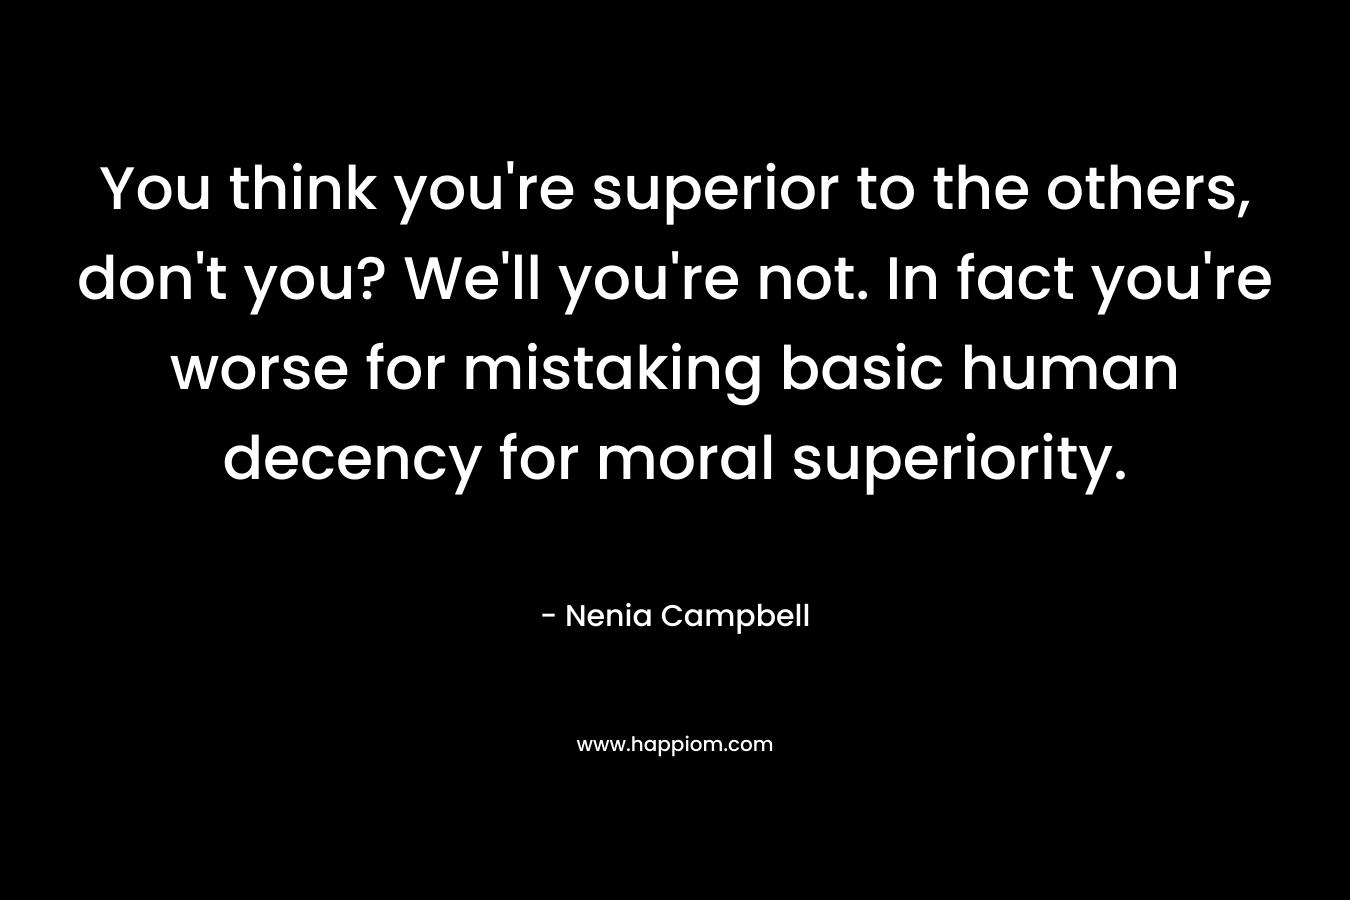 You think you’re superior to the others, don’t you? We’ll you’re not. In fact you’re worse for mistaking basic human decency for moral superiority. – Nenia Campbell